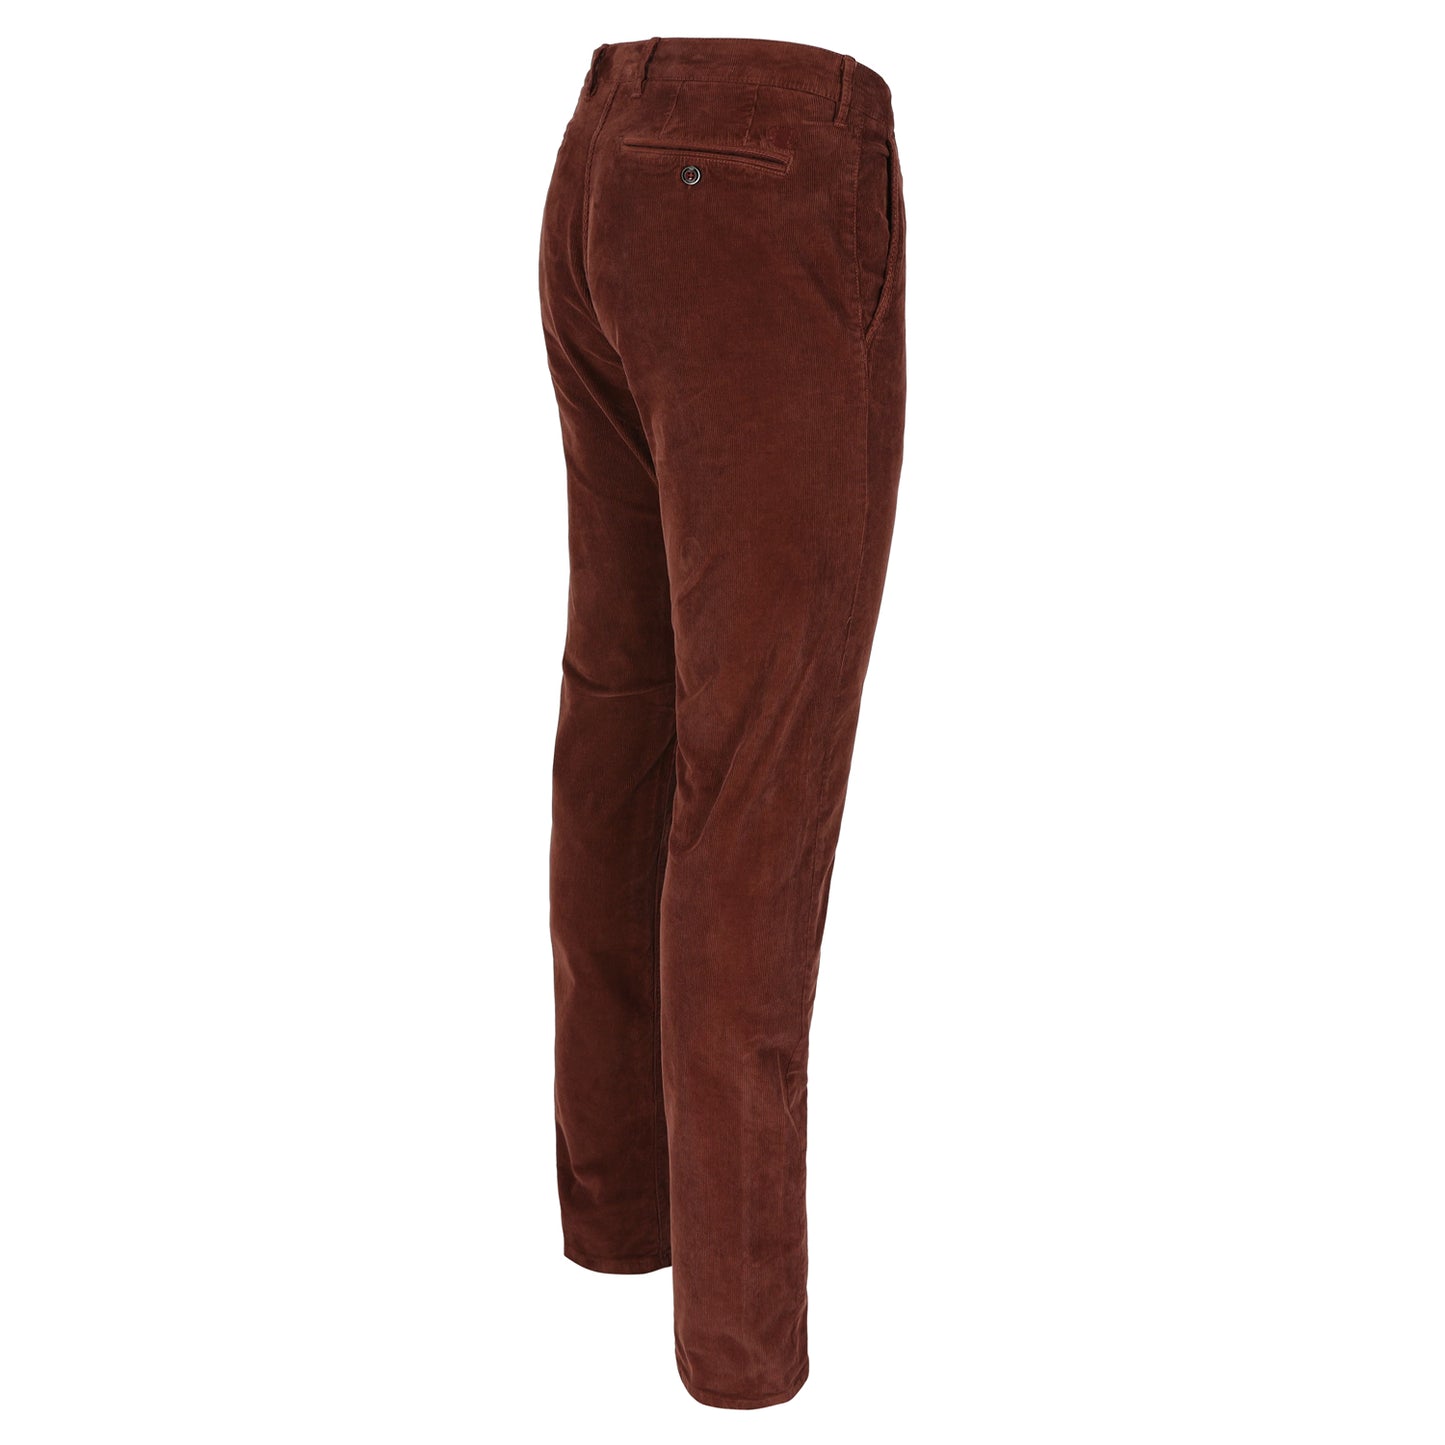 Cherry red corduroy slim fit trousers Atelier Noterman - 1585/406